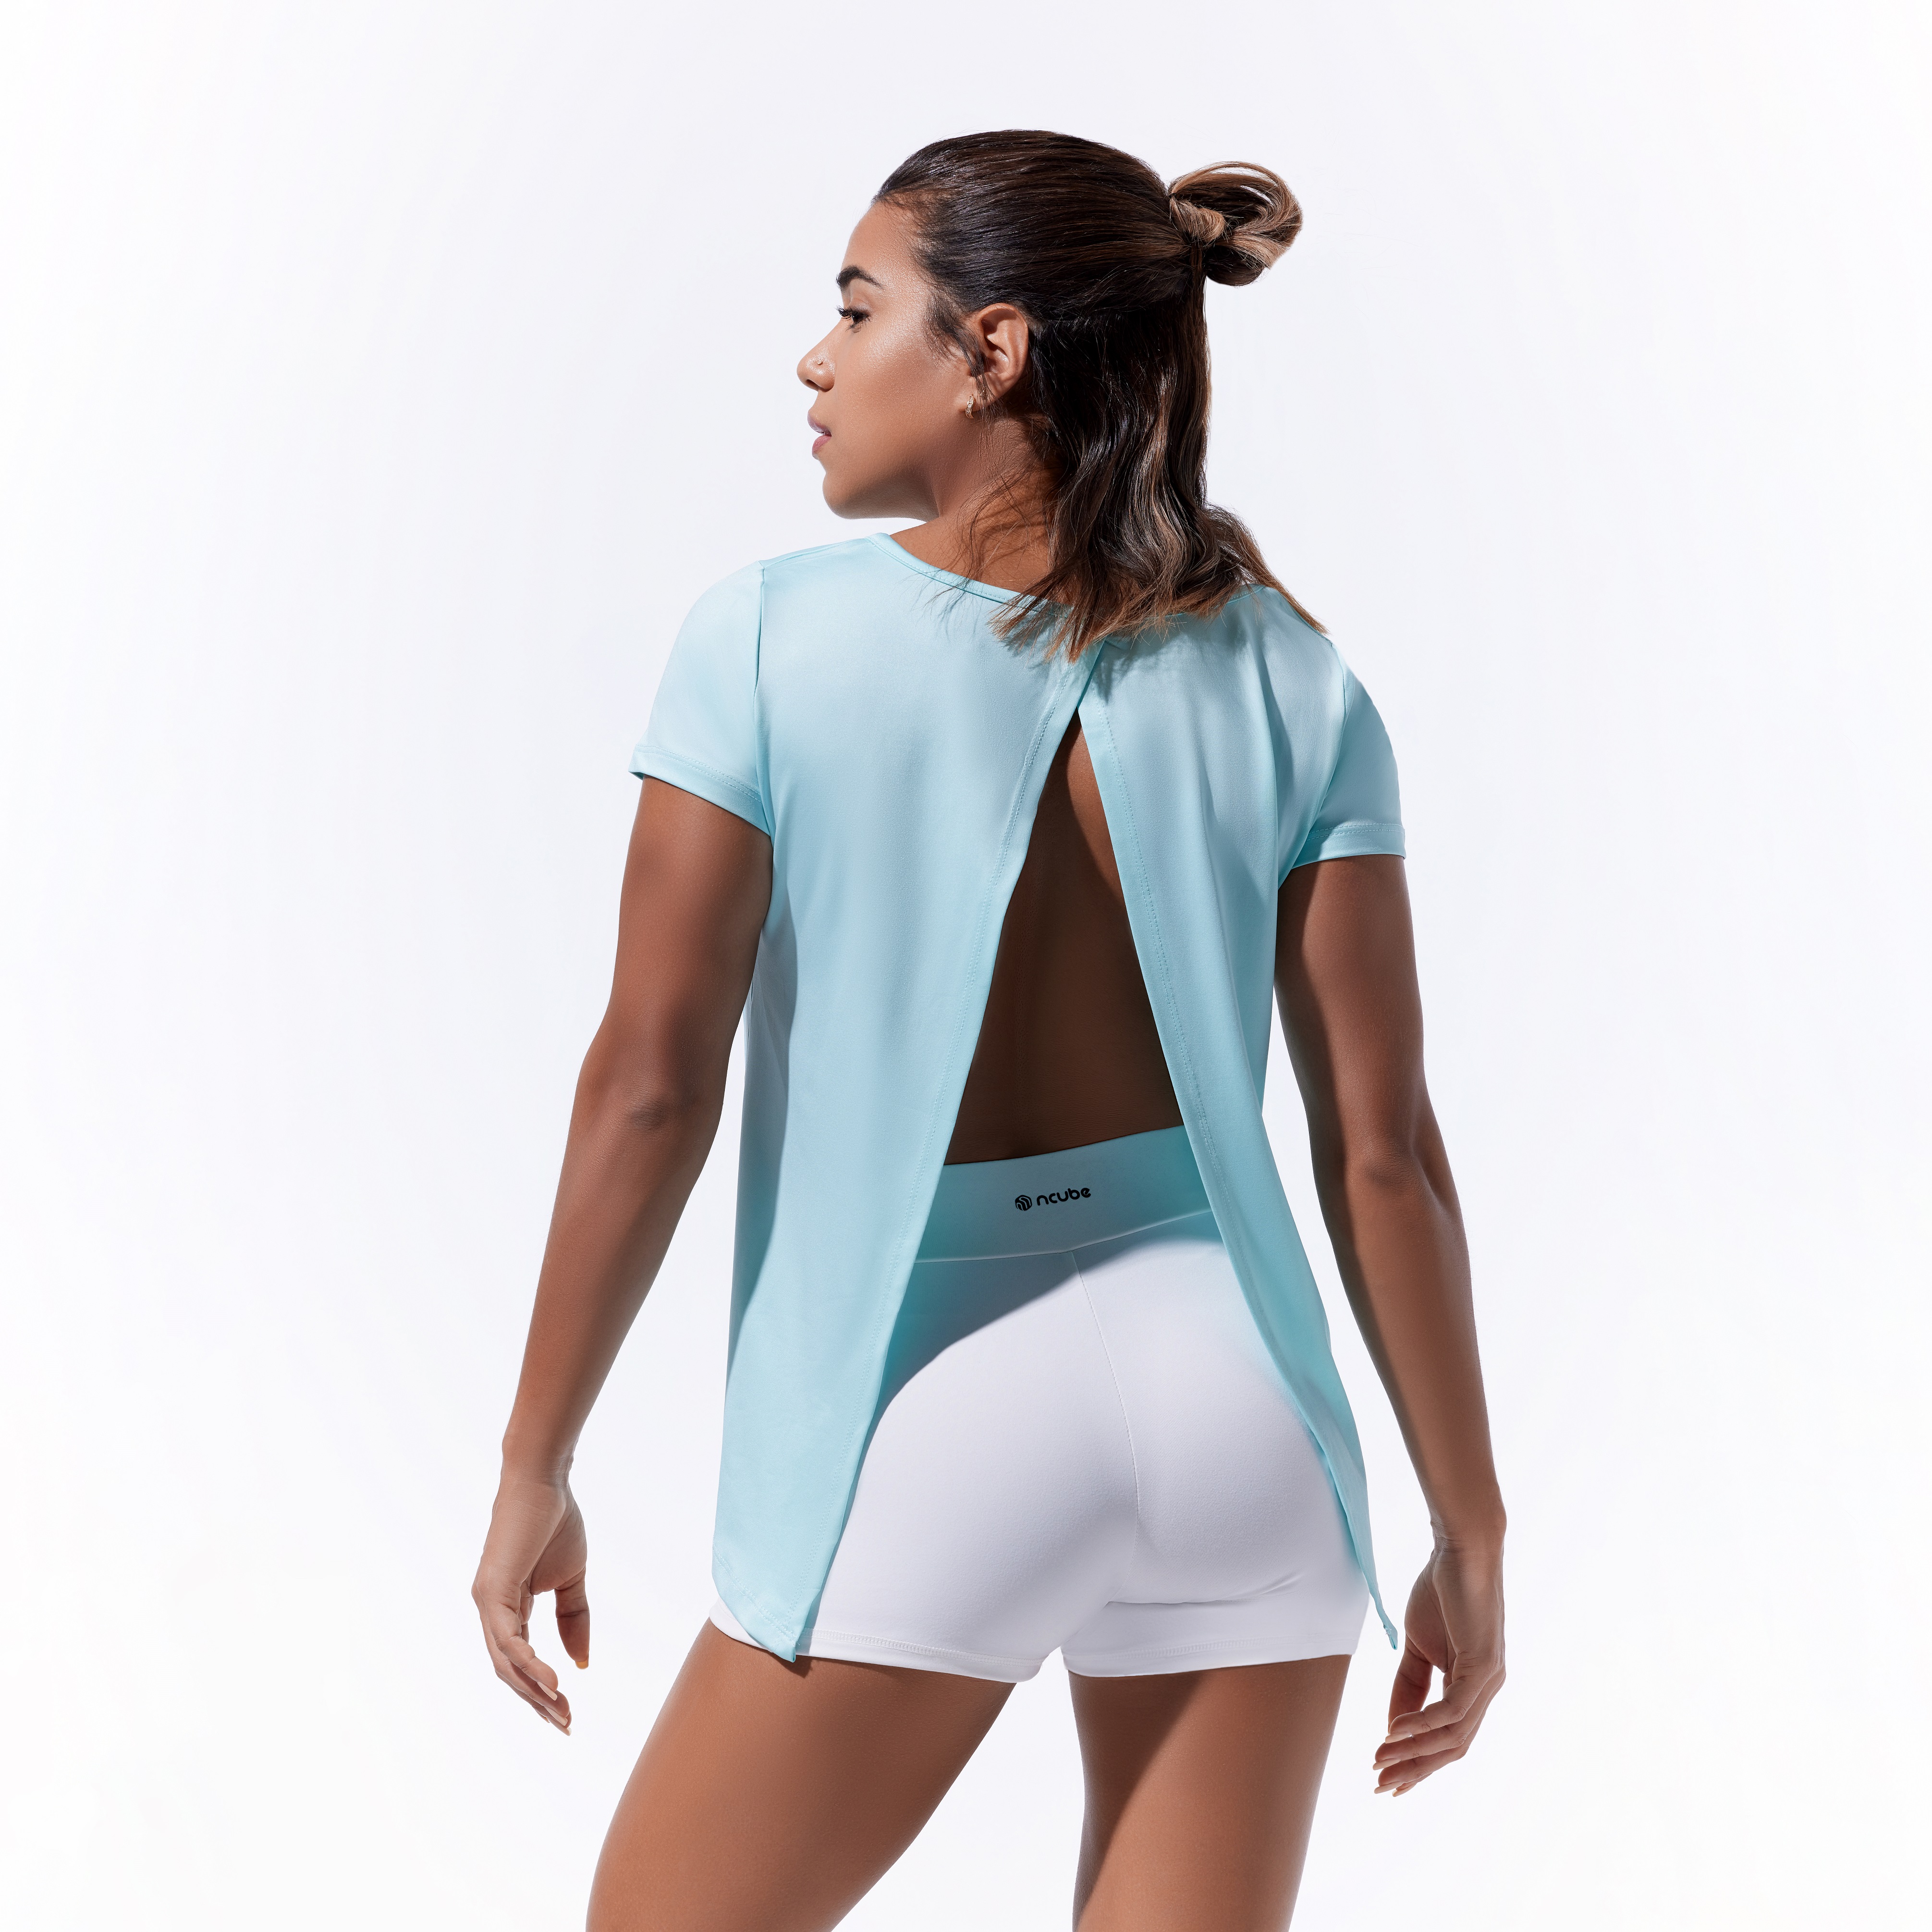 Women's Tops and Jackets – Ncube Athleisurewear